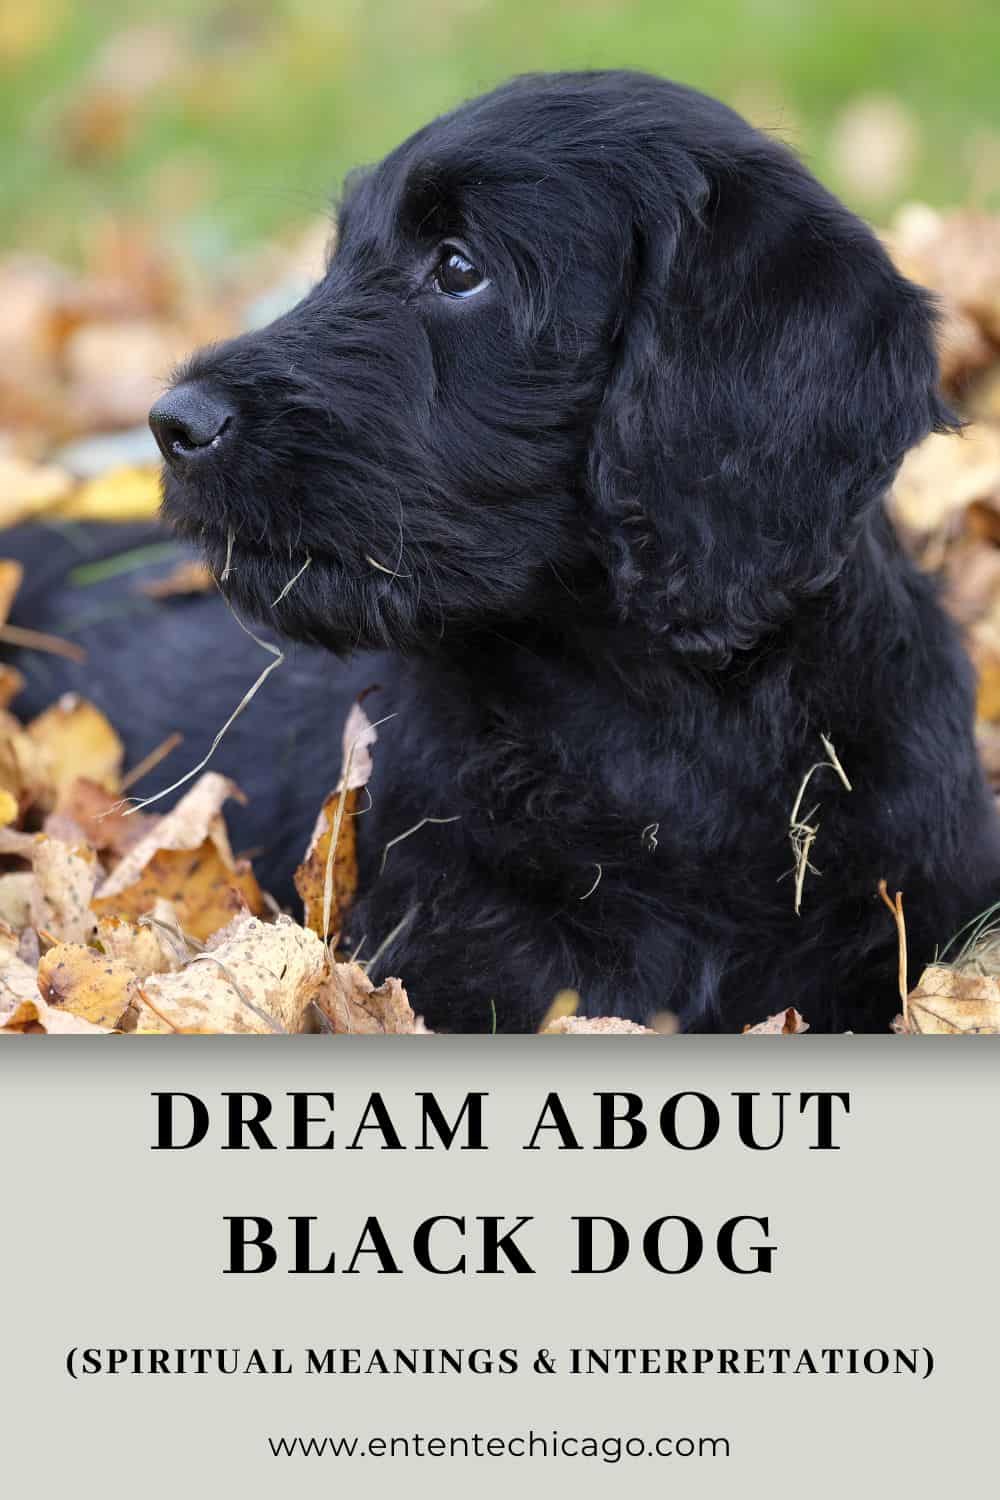 Symbolic Meaning of Black Dog Dreams